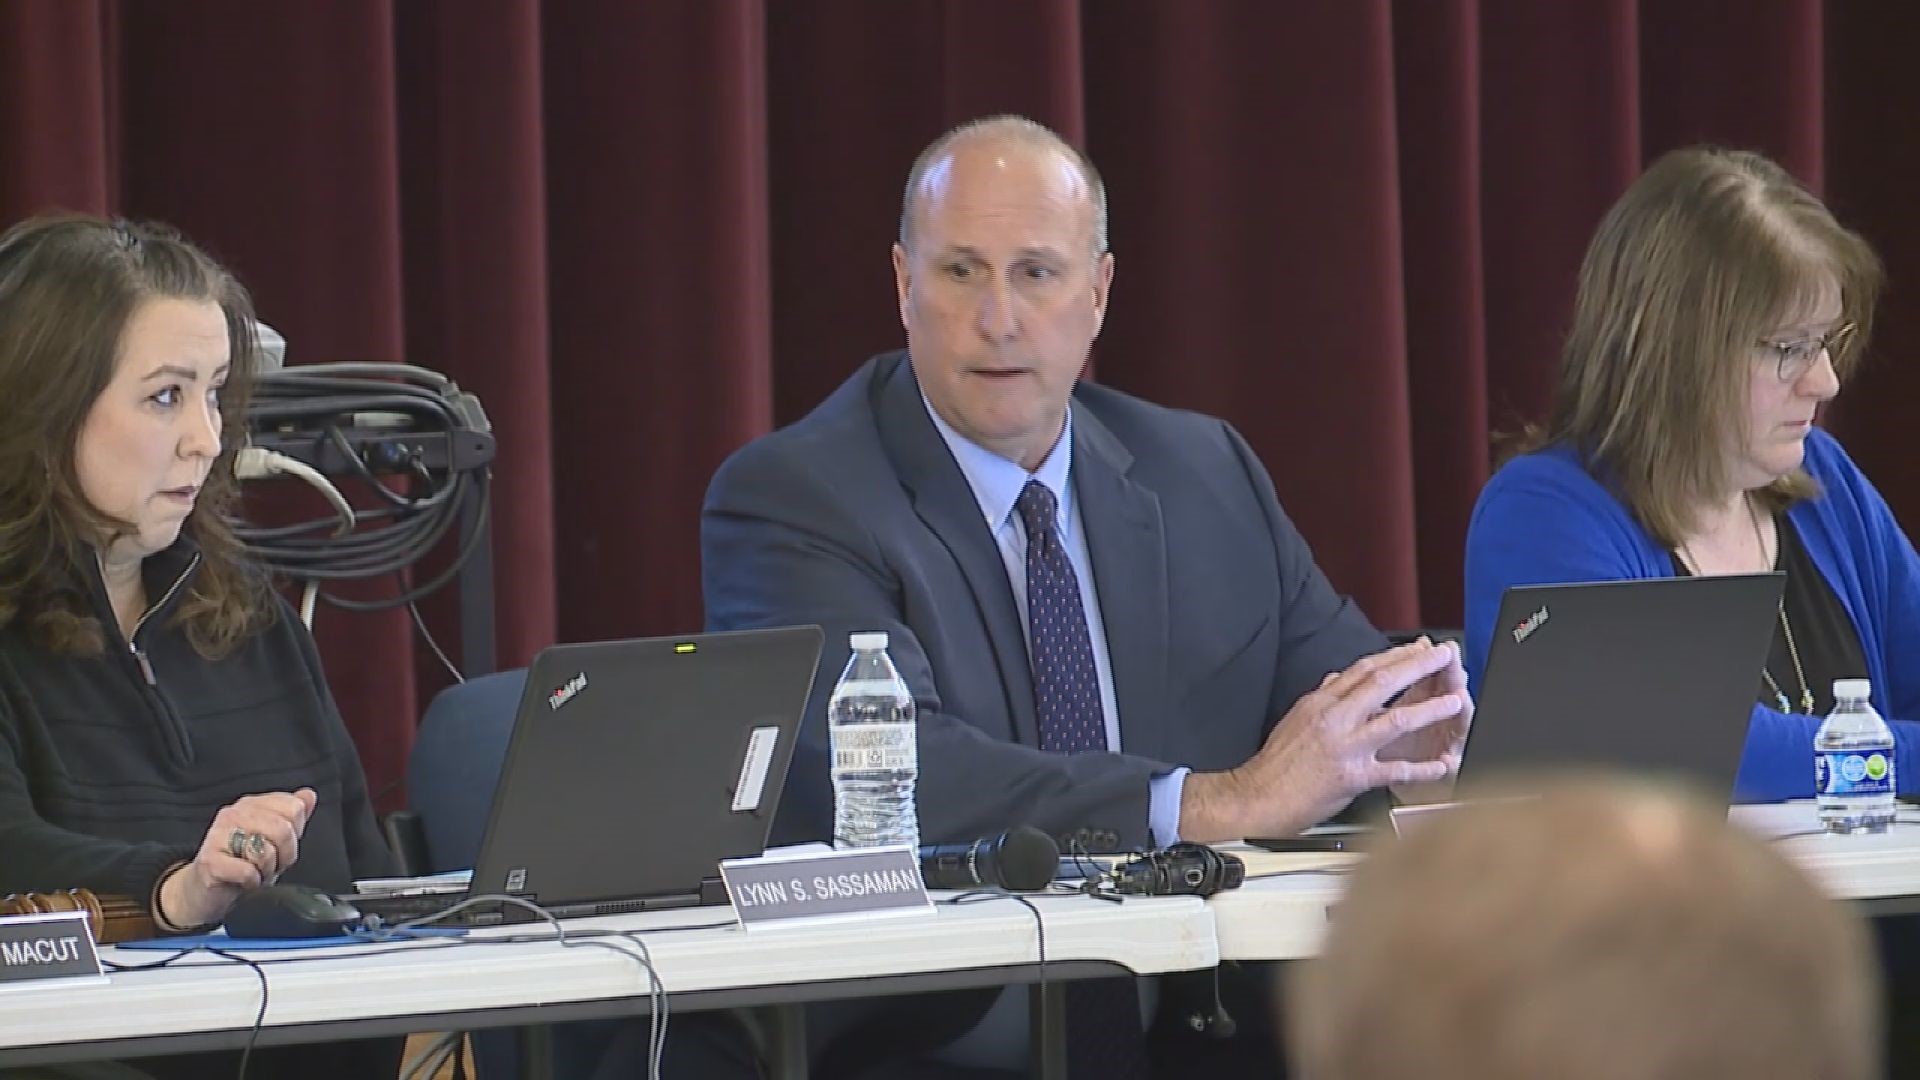 The Lower Dauphin School Board unanimously approved Superintendent Robert Schultz's resignation at Monday night's meeting.